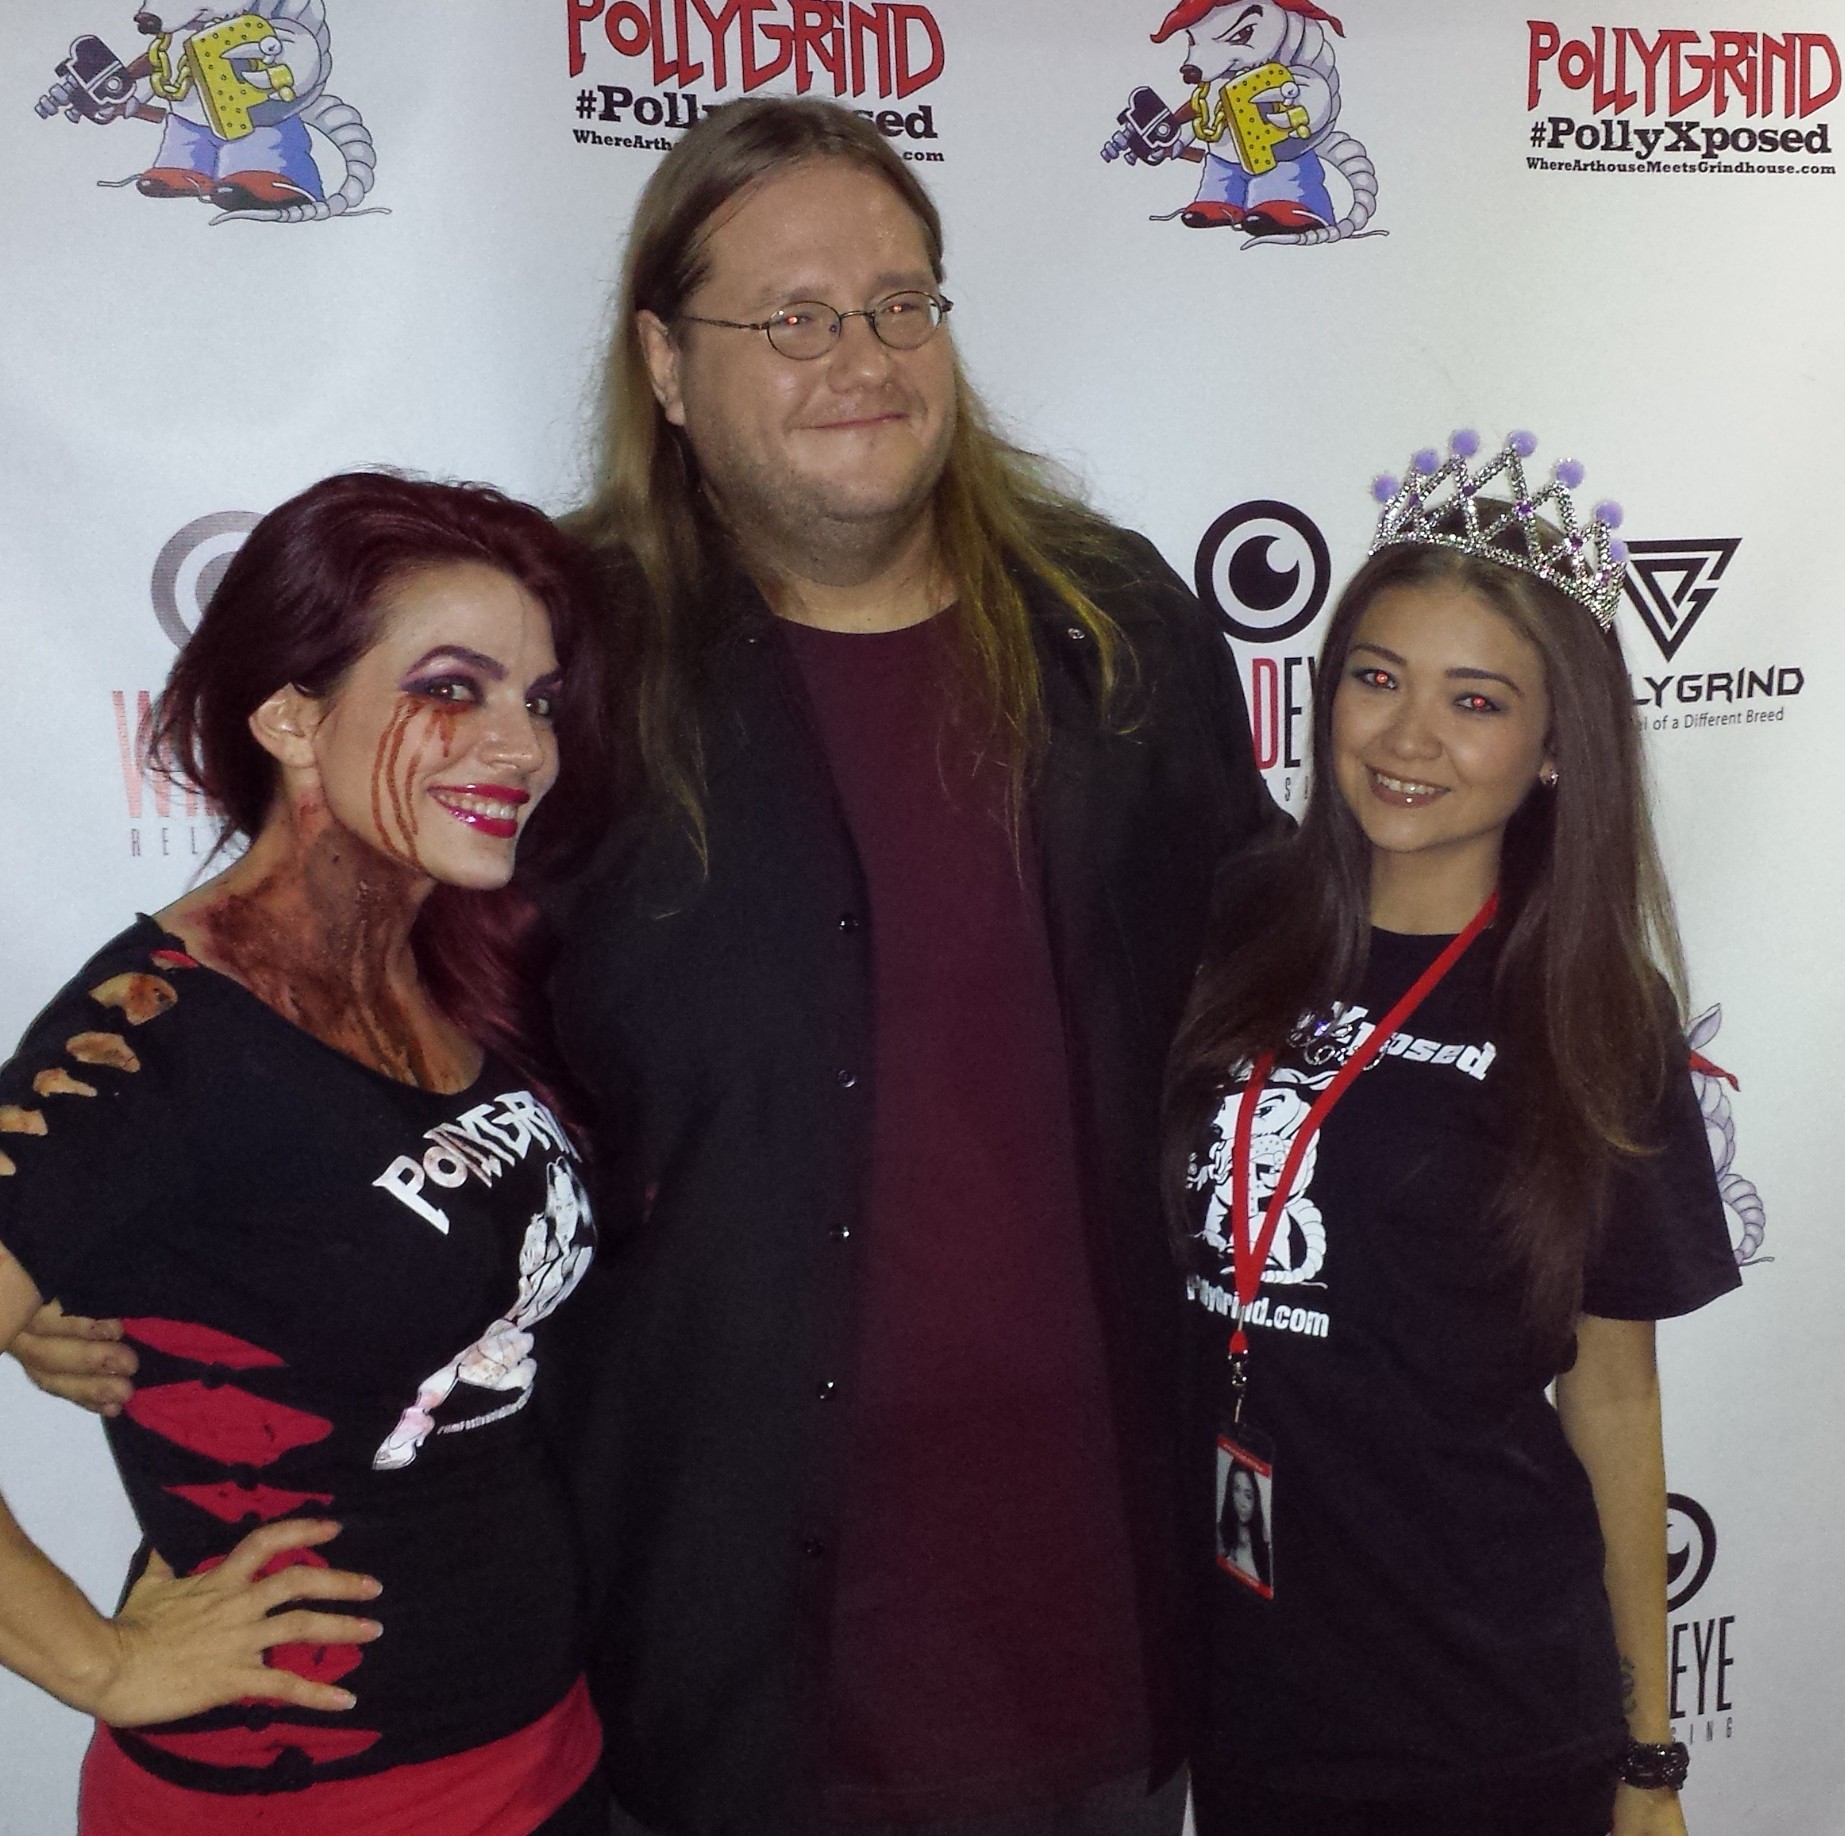 Tommie Vegas with Pollygrind Film Festival founder and creator, Chad Clinton Freeman and Corinne Garfield after being crowned Pollygrind Queen!